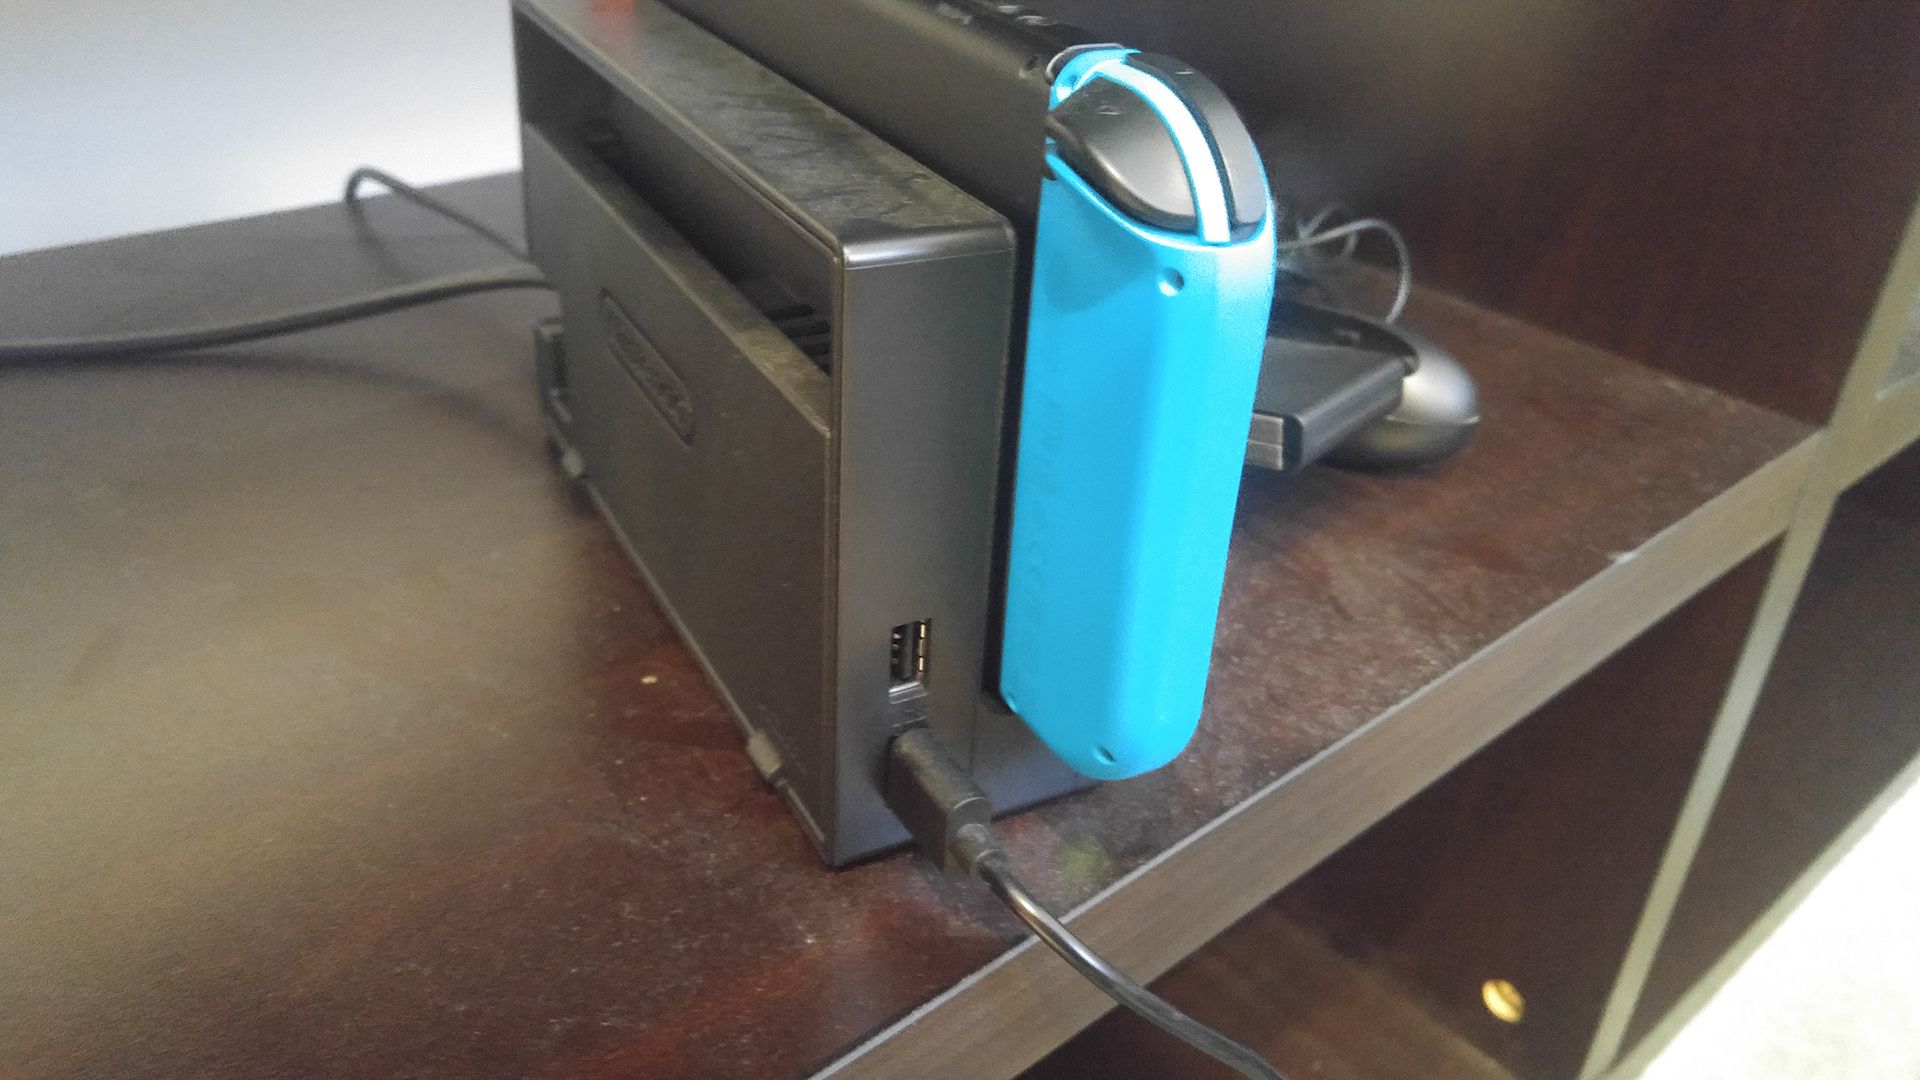 The left side of a Nintendo Switch dock, there the two USB-A ports are located.